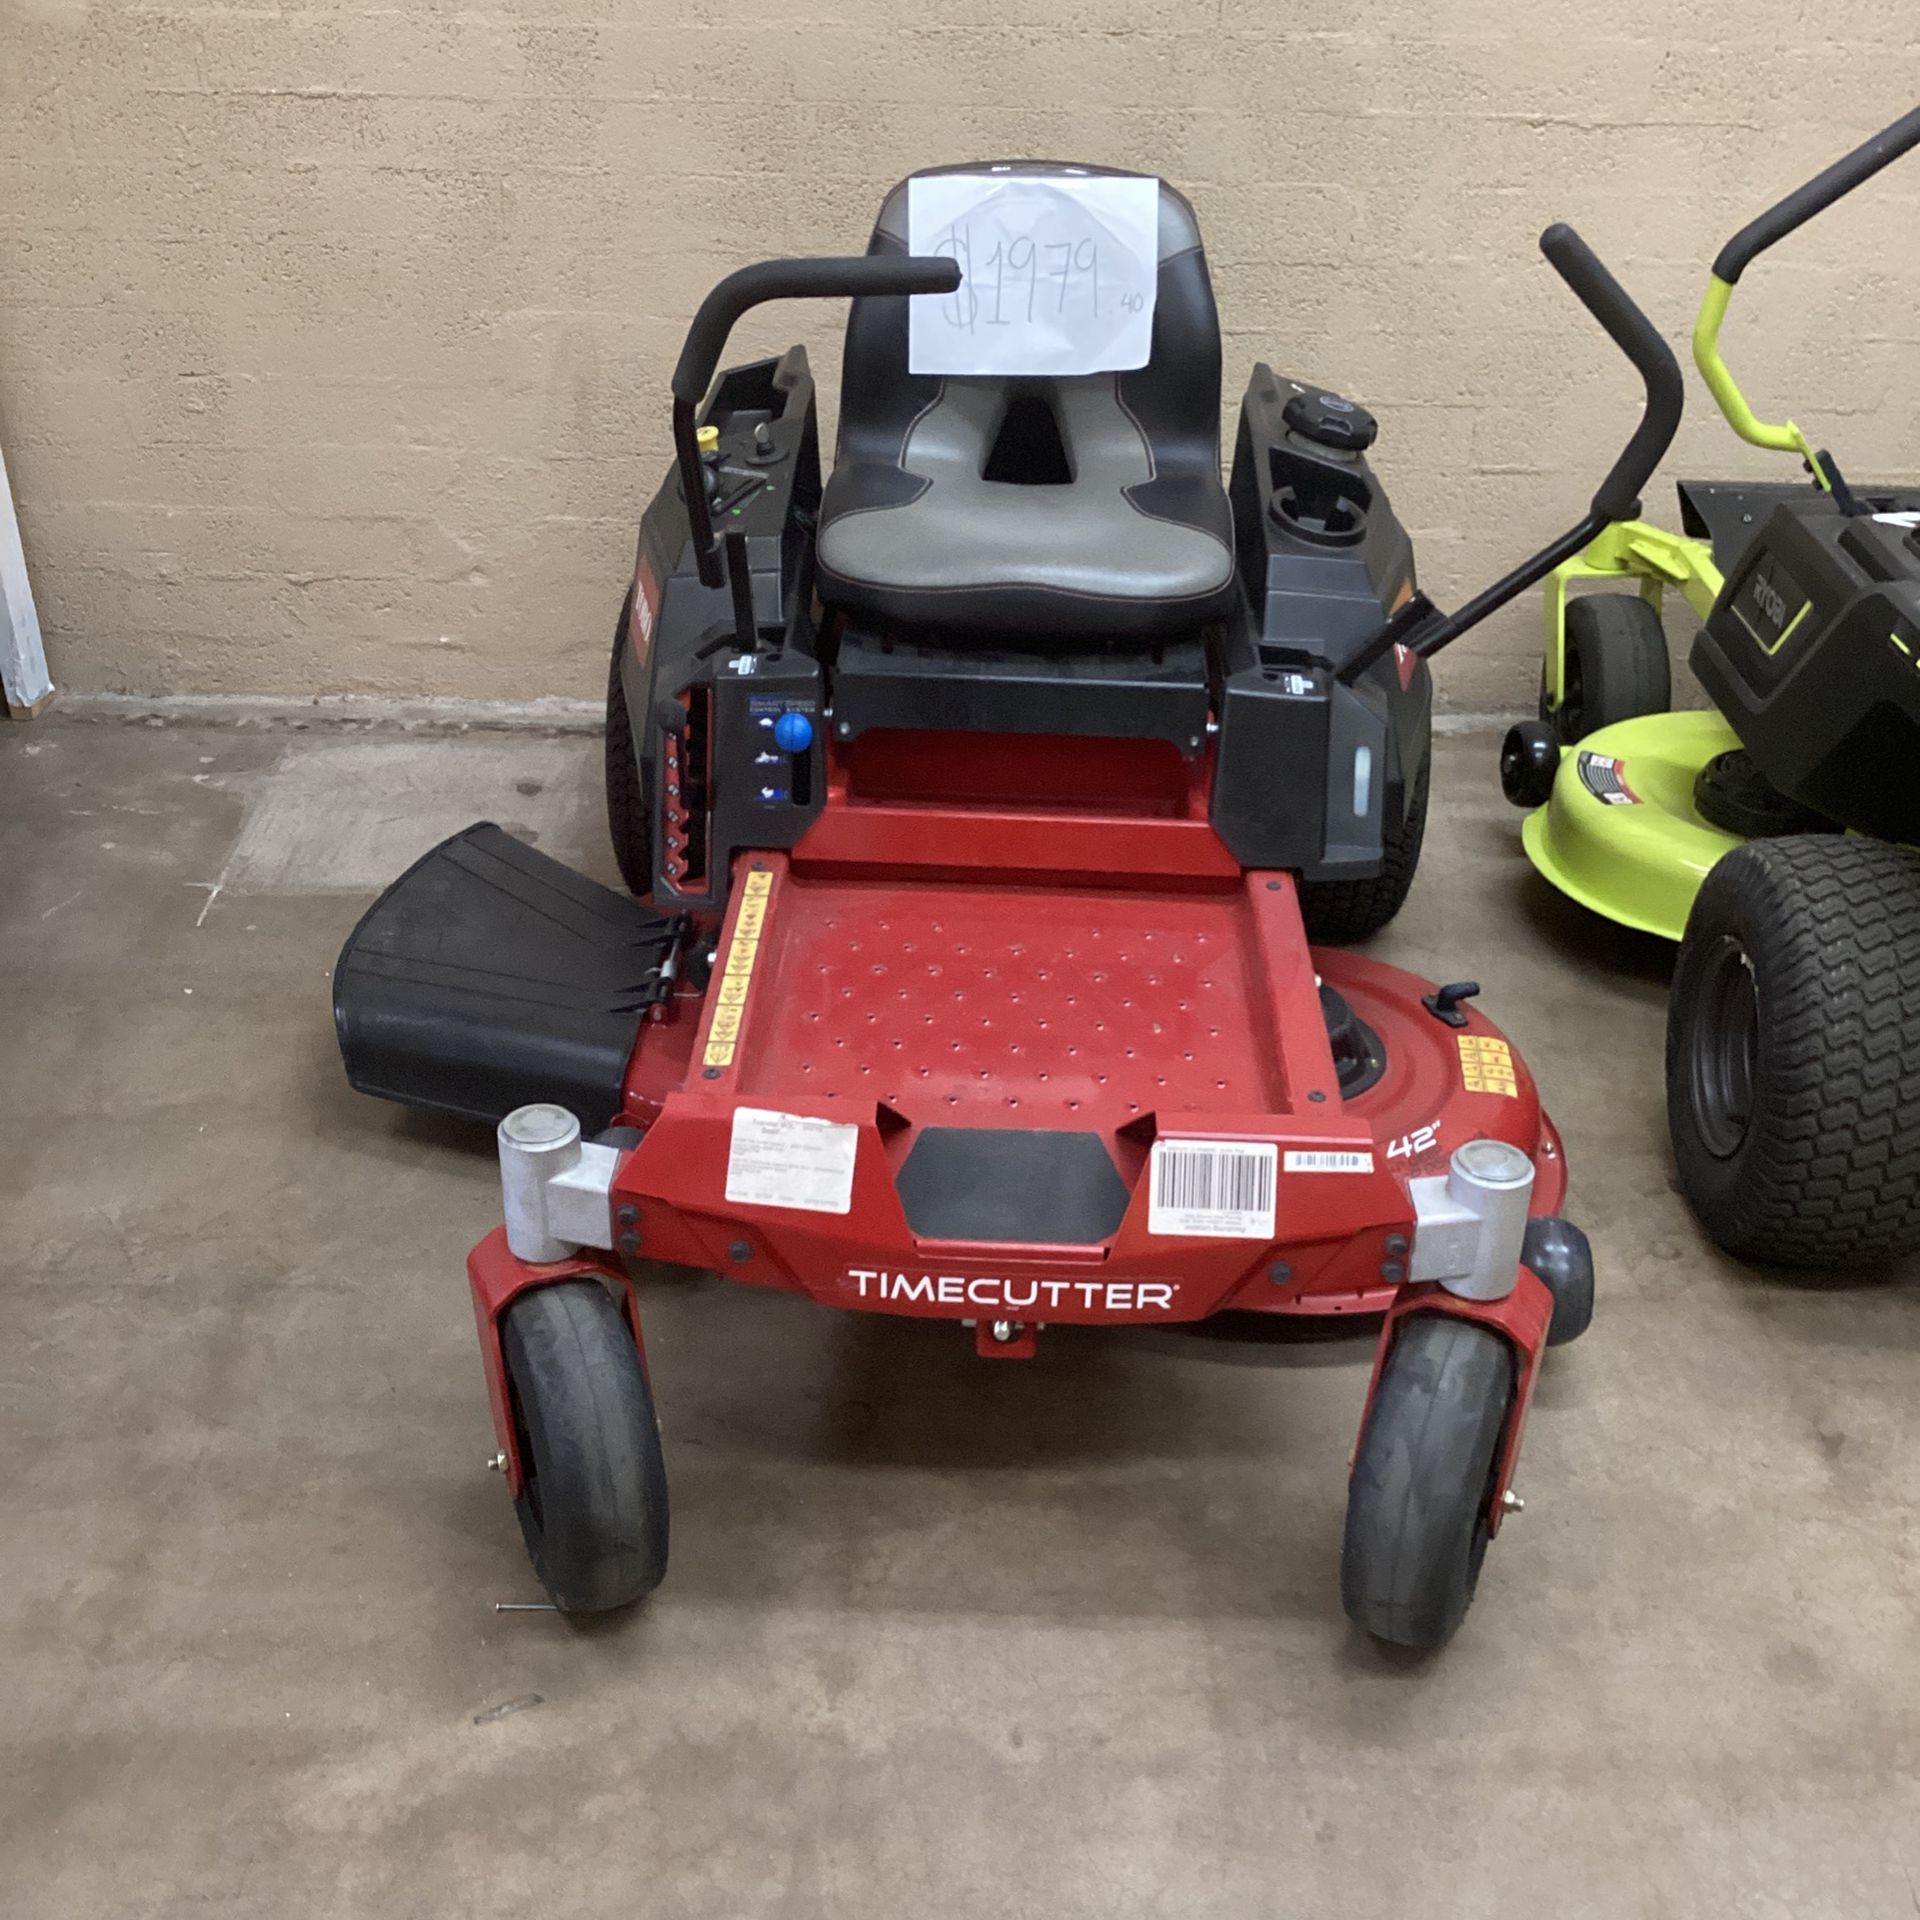  (Used Good) Toro TimeCutter 42 in. Briggs and Stratton 15.5 HP Zero Turn Riding Mower with Smart Speed